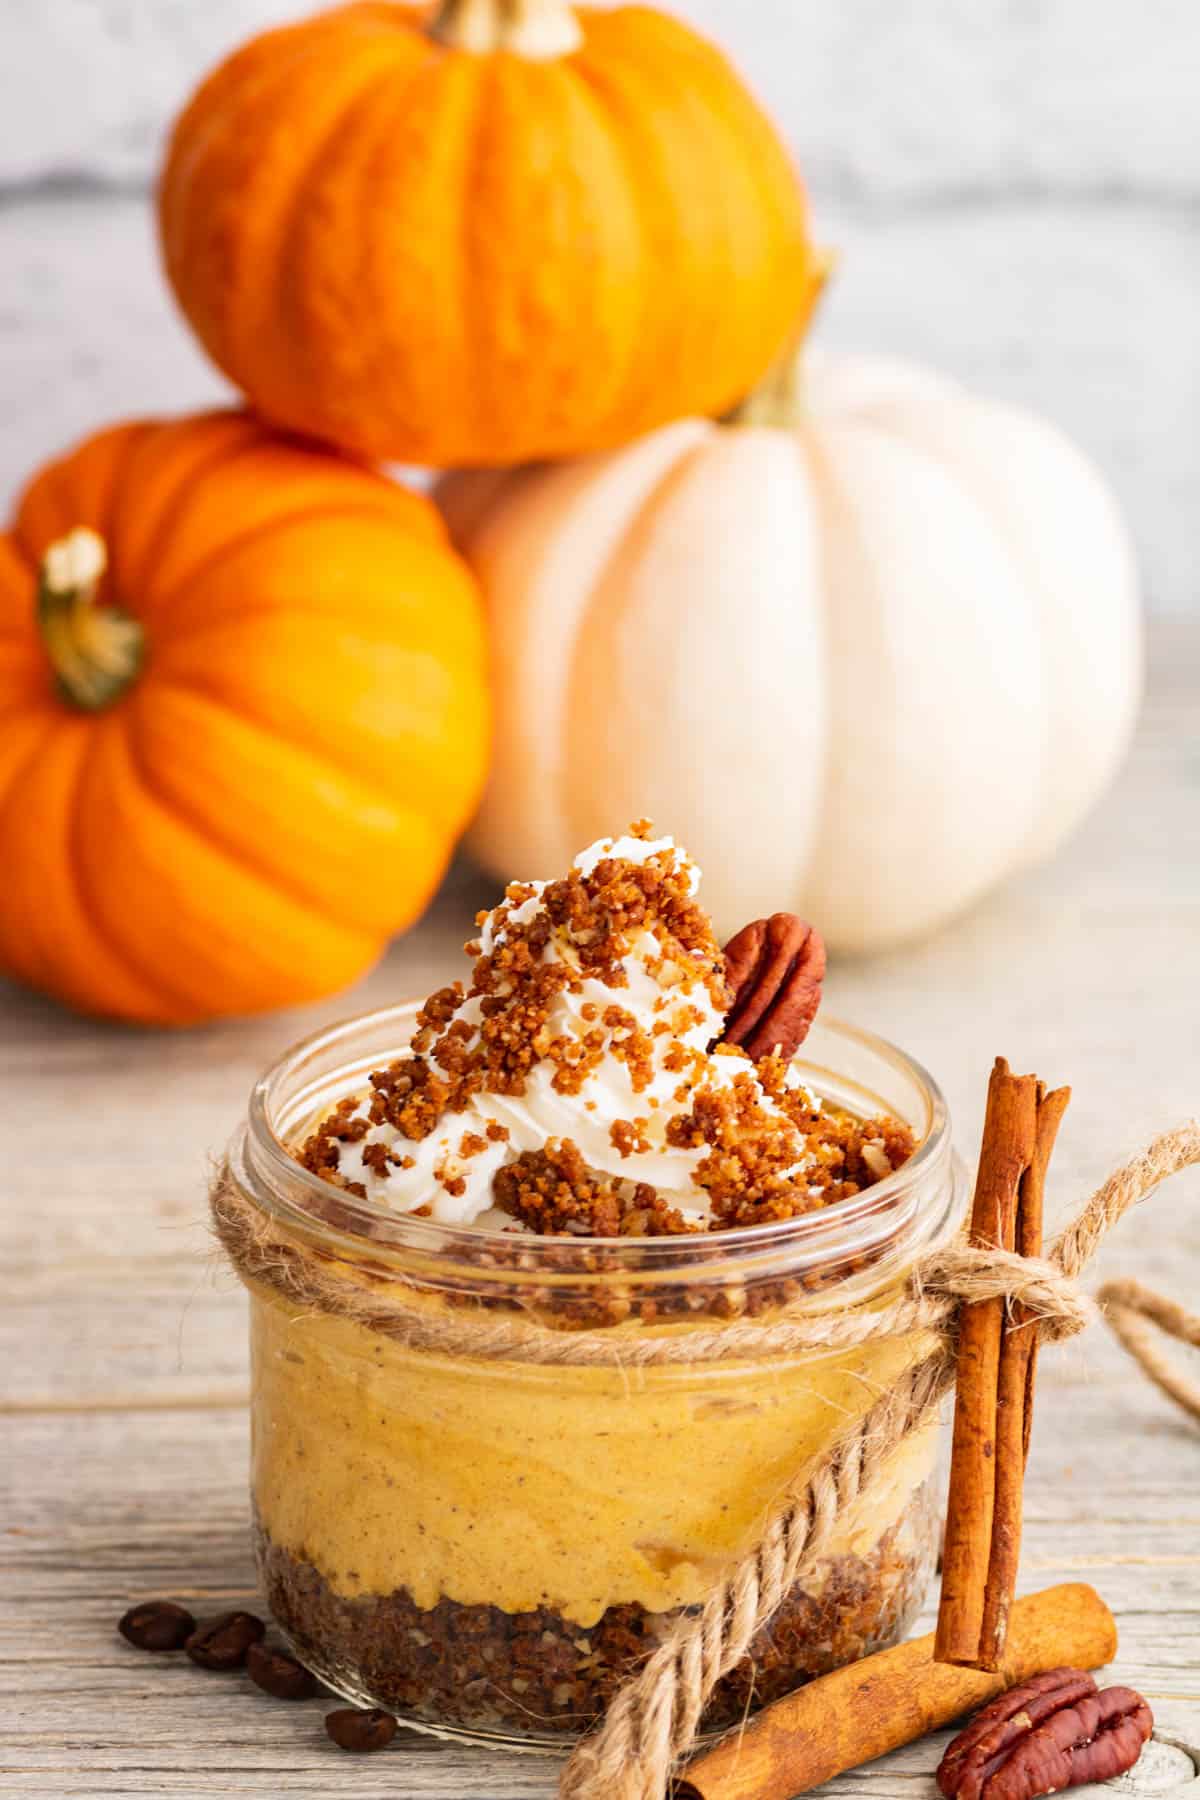 An individually sized Pumpkin Delight dessert topped with gingersnap crumbs and pecans sits amongst decorative pumpkins.